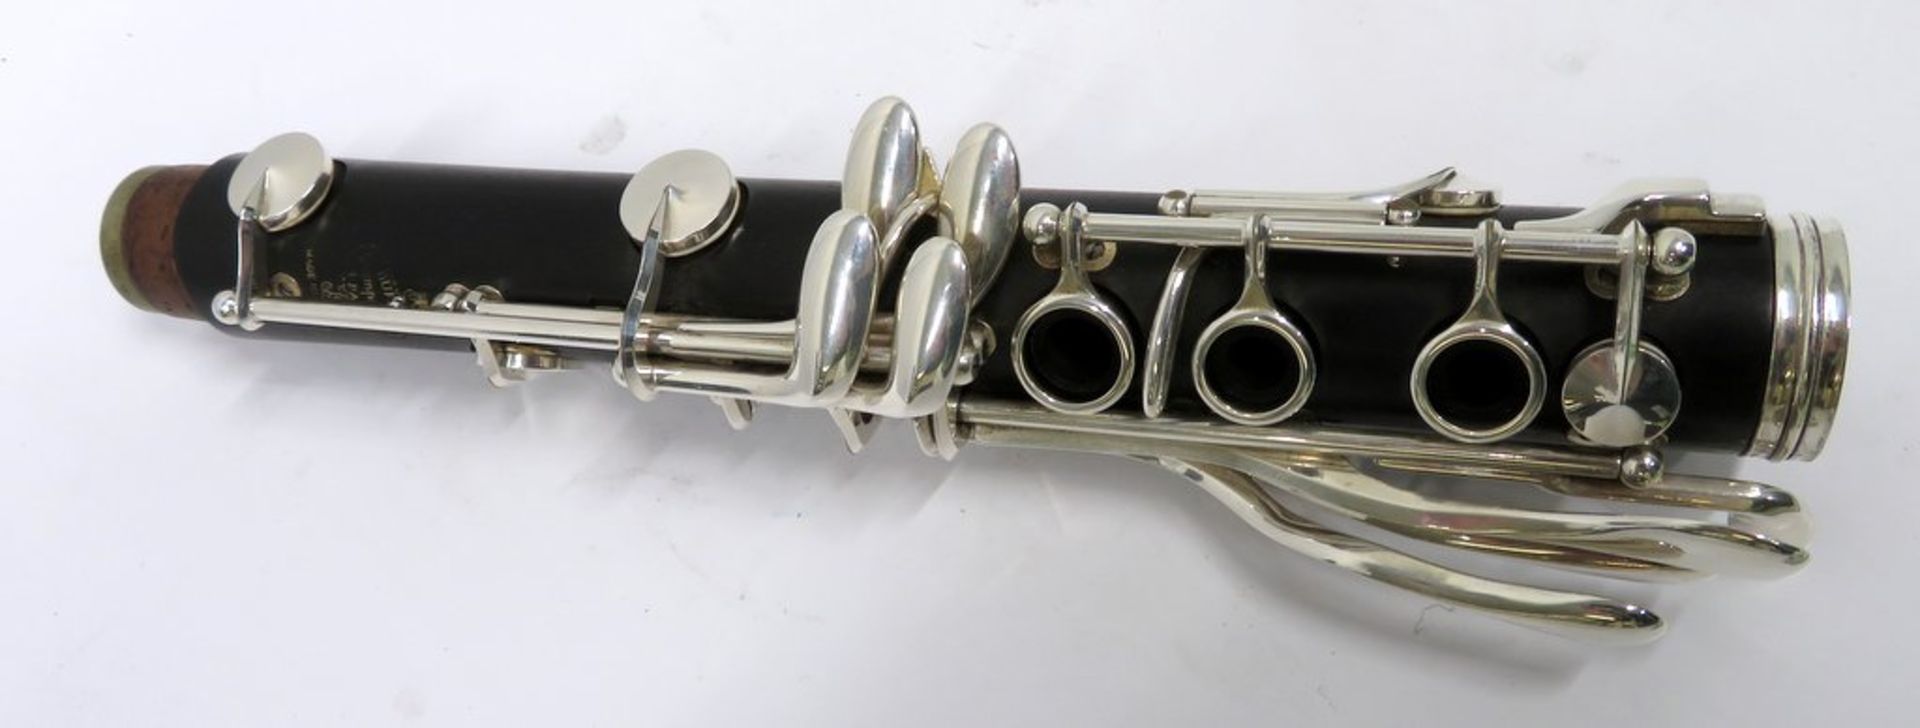 Buffet Crampon Prestige R13 Clarinet Complete With Case. - Image 7 of 18